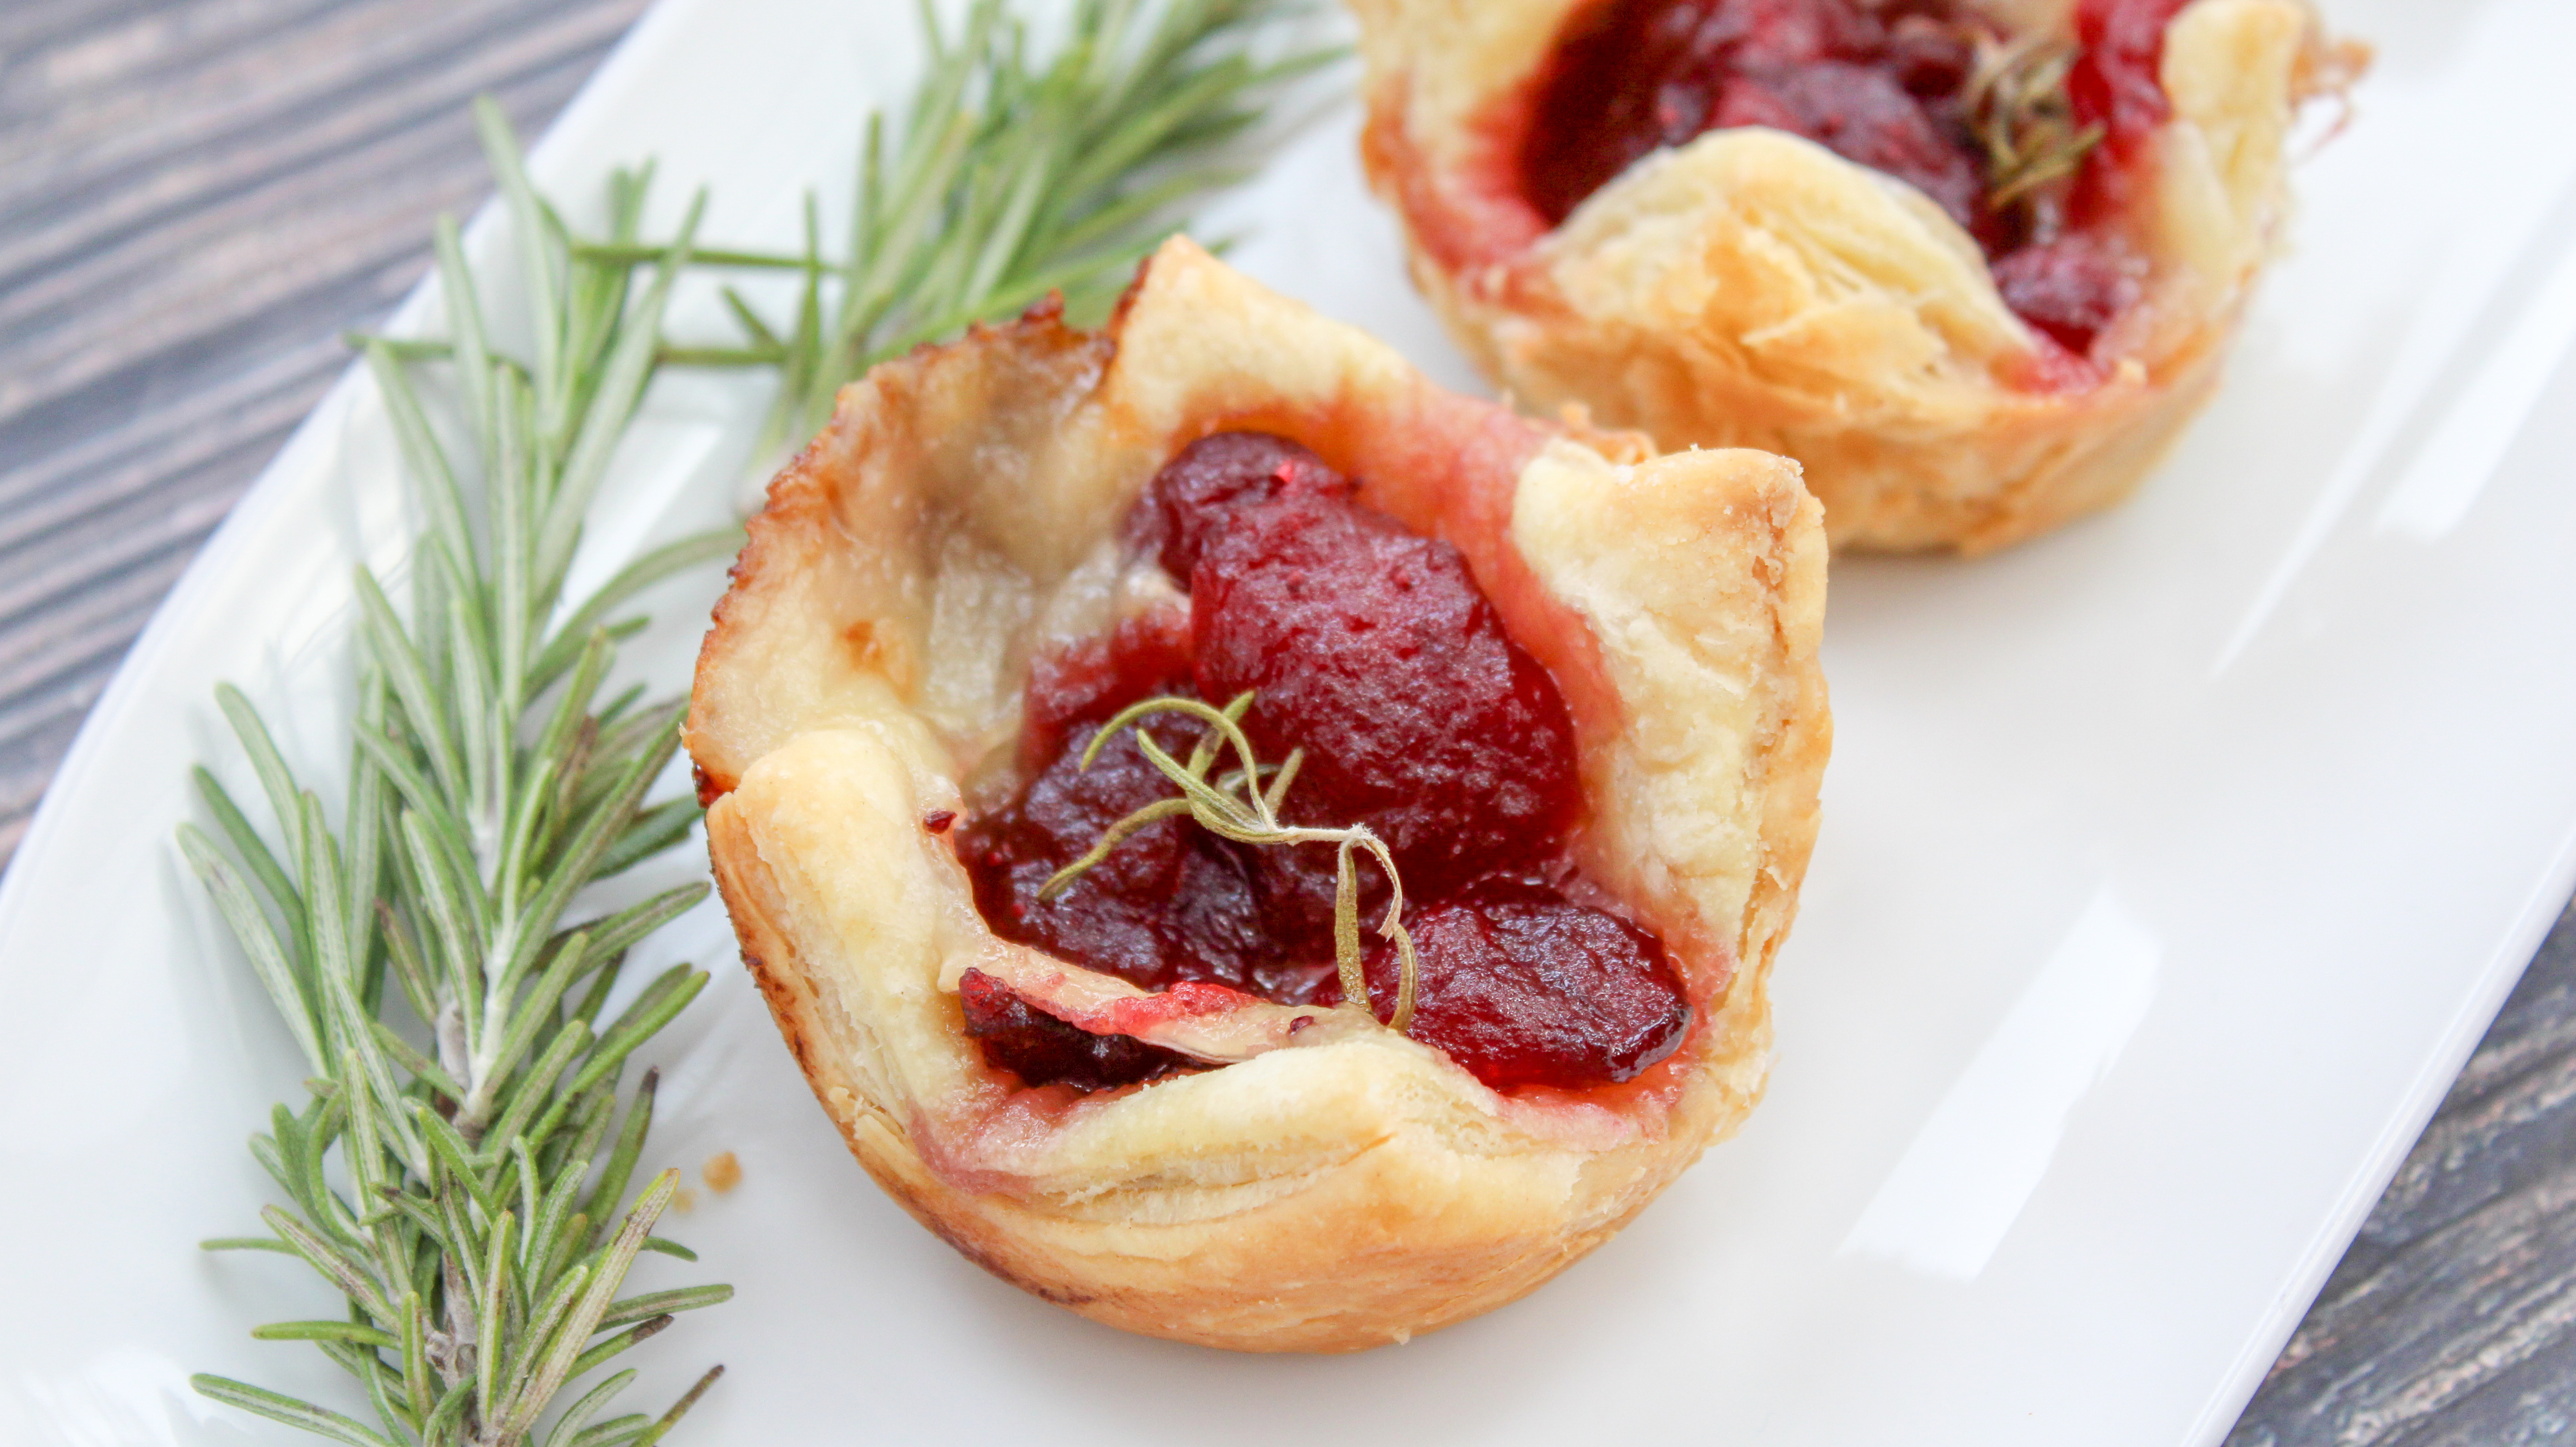 Cranberry and brie cheese in baked puffed pastry topped with rosemary